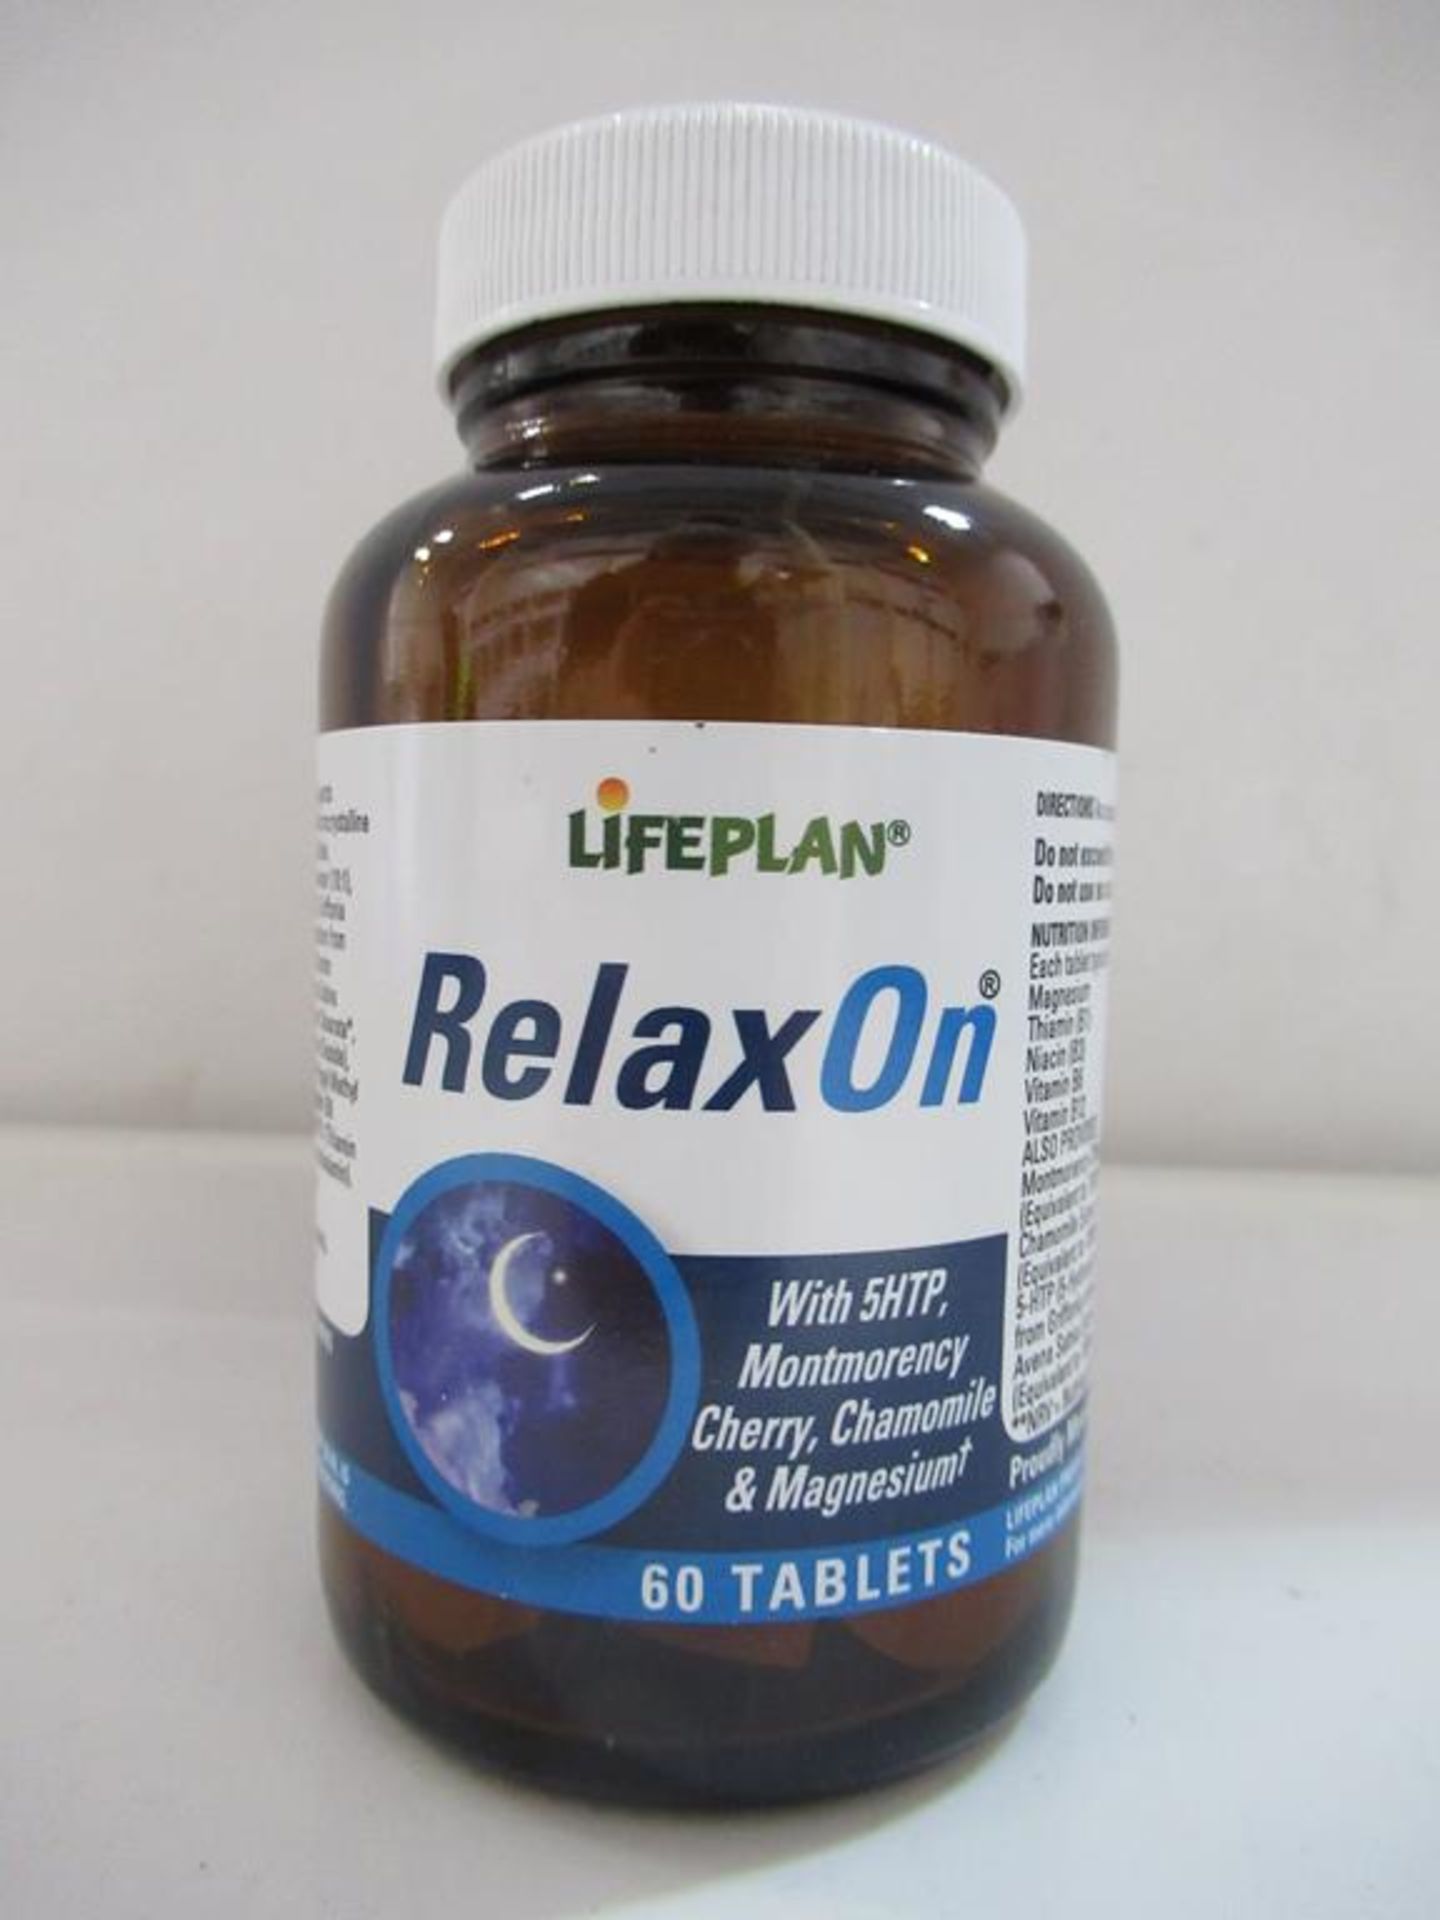 7 supplements to include Lifeplan Relax On, Botanicals Garcinia Cambogia complex, Natures Plus Niaci - Image 5 of 8